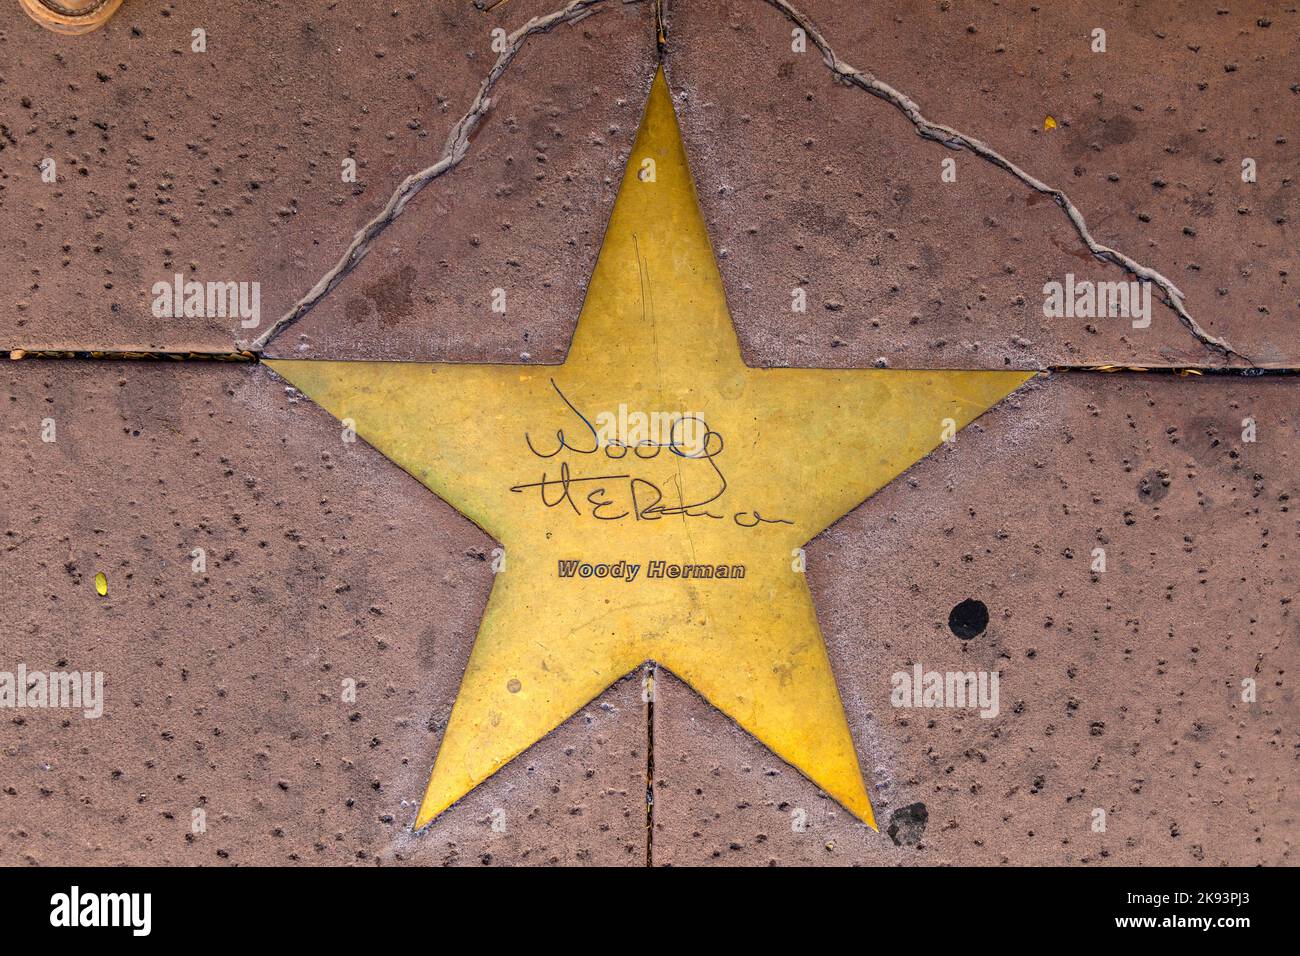 PHOENIX, USA - June 14: star of Woody Herman in copper reflect the past glory of the Hotel San Carlos on June 14,2012 in Phoenix, USA. The stars in th Stock Photo